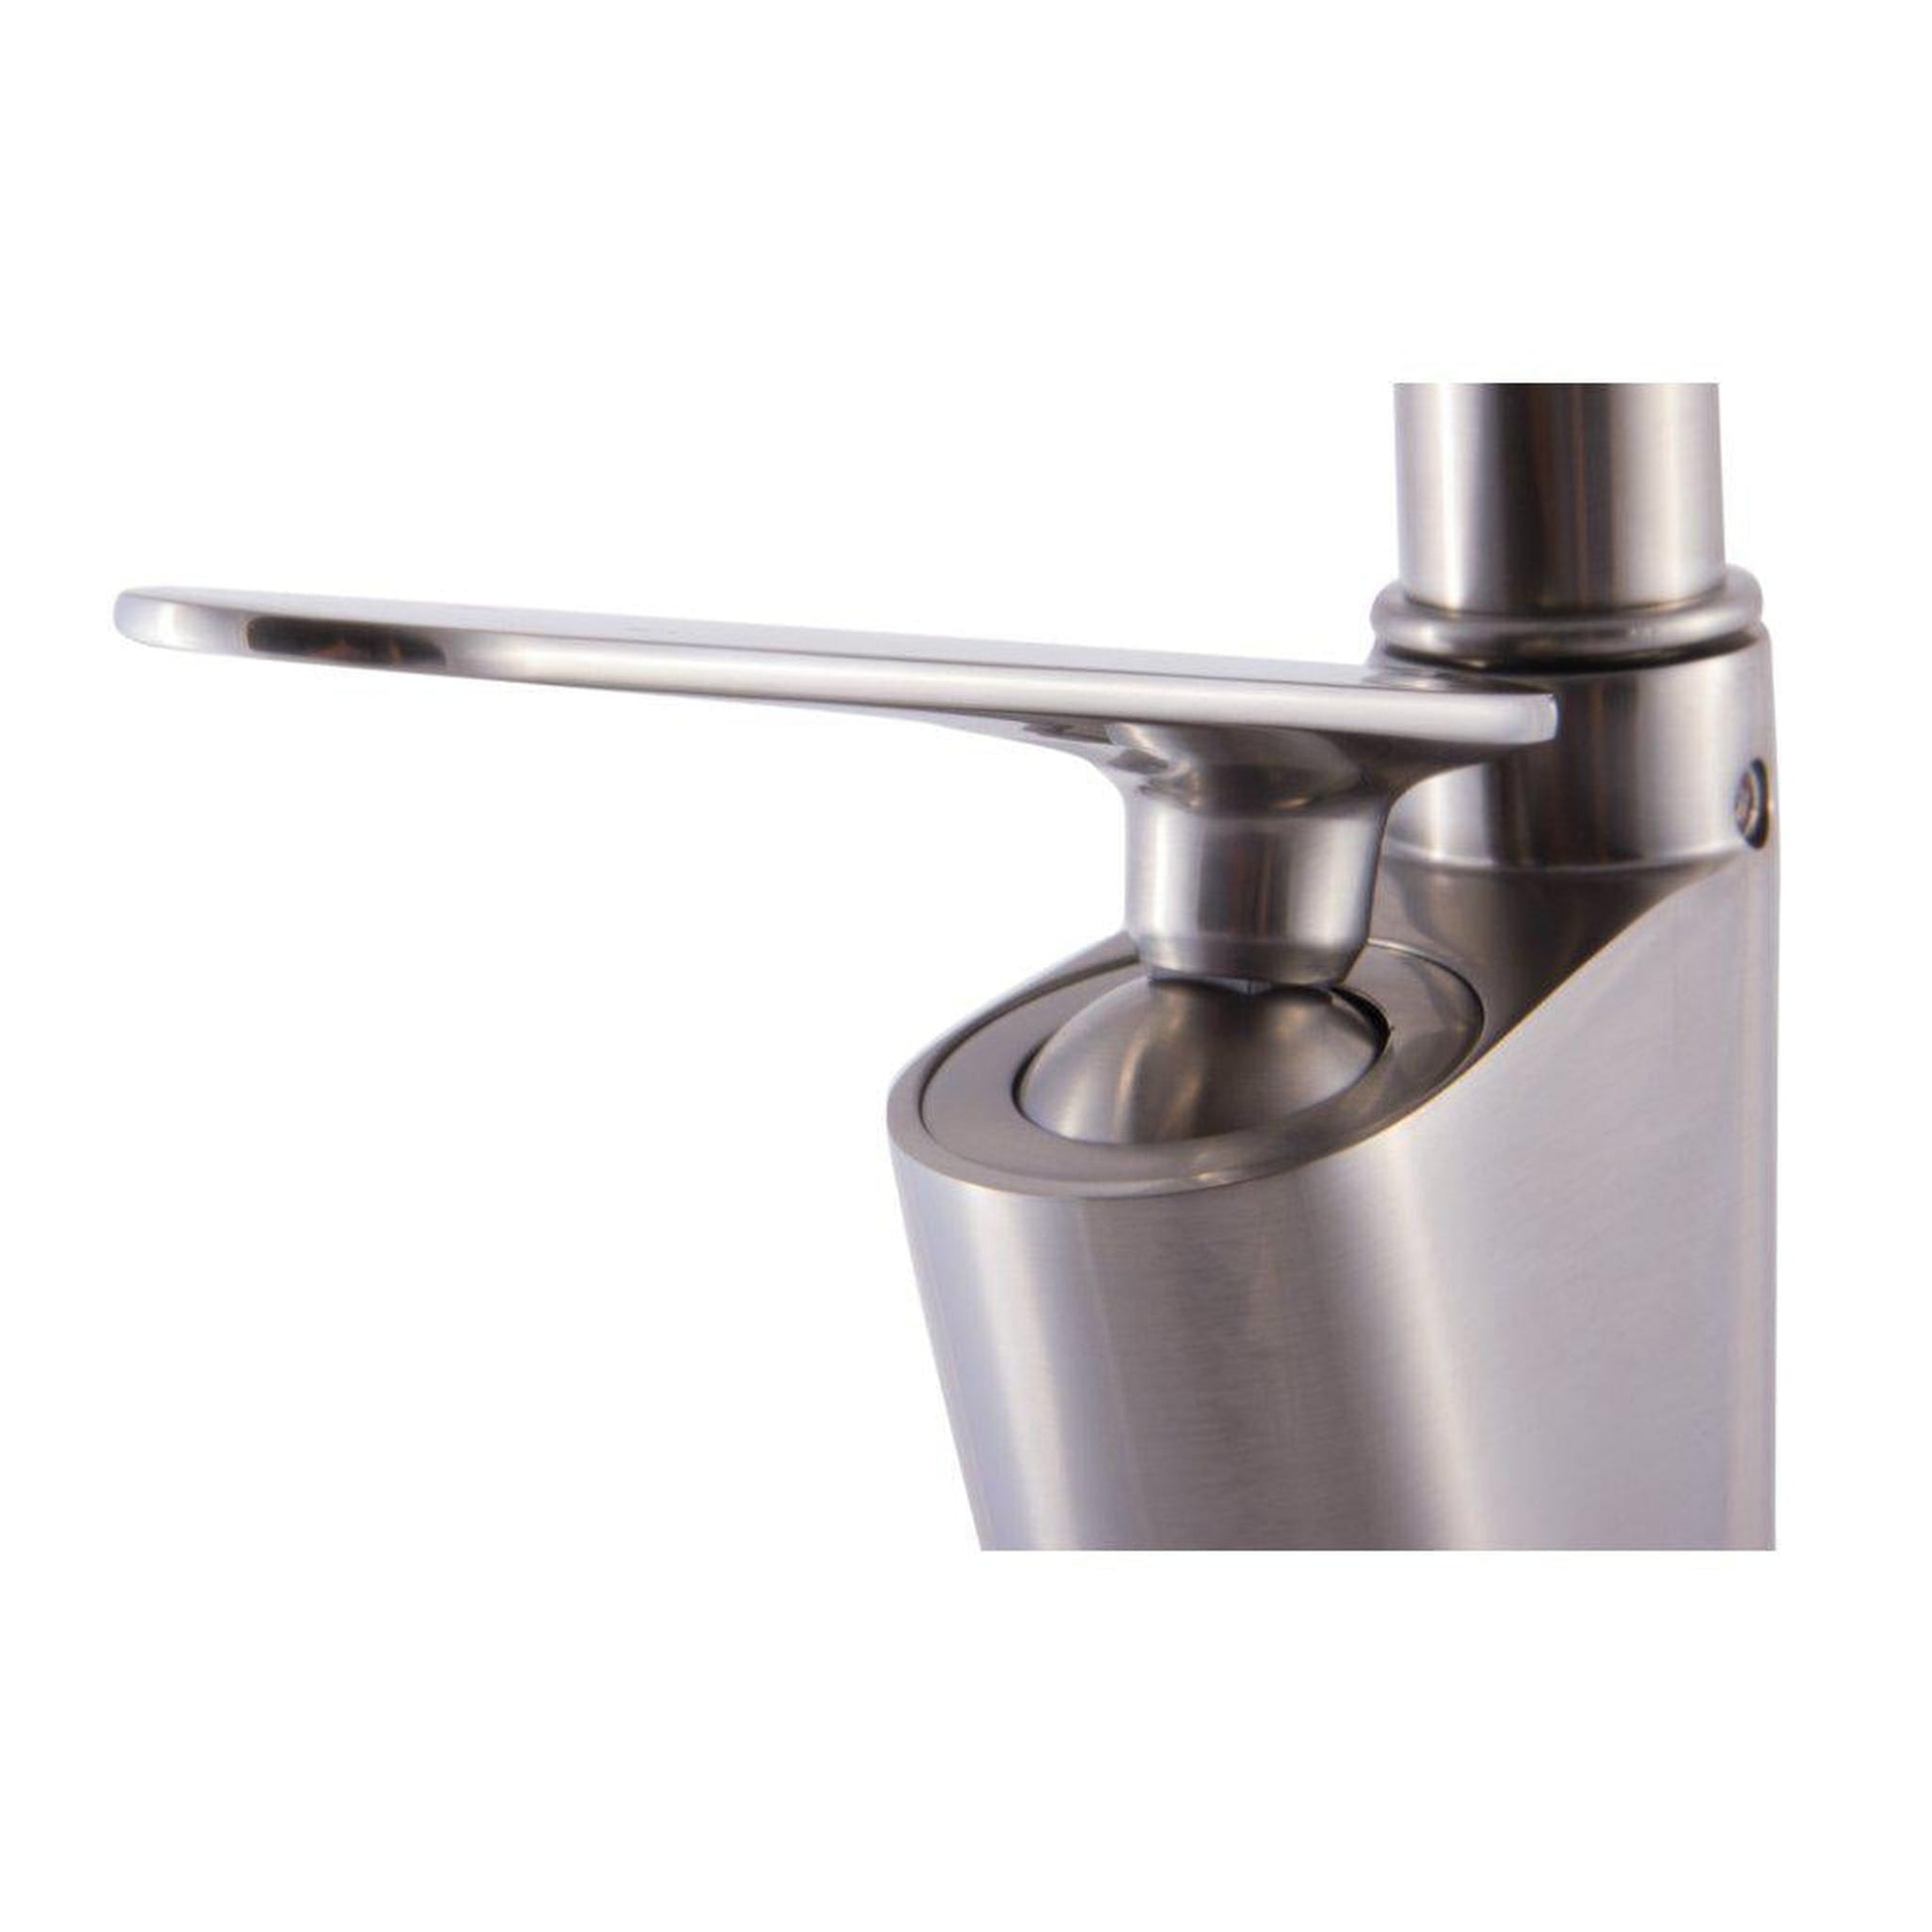 ALFI Brand AB3600-BN Brushed Nickel Vessel Gooseneck Spout Brass Bathroom Sink Faucet With Single Lever